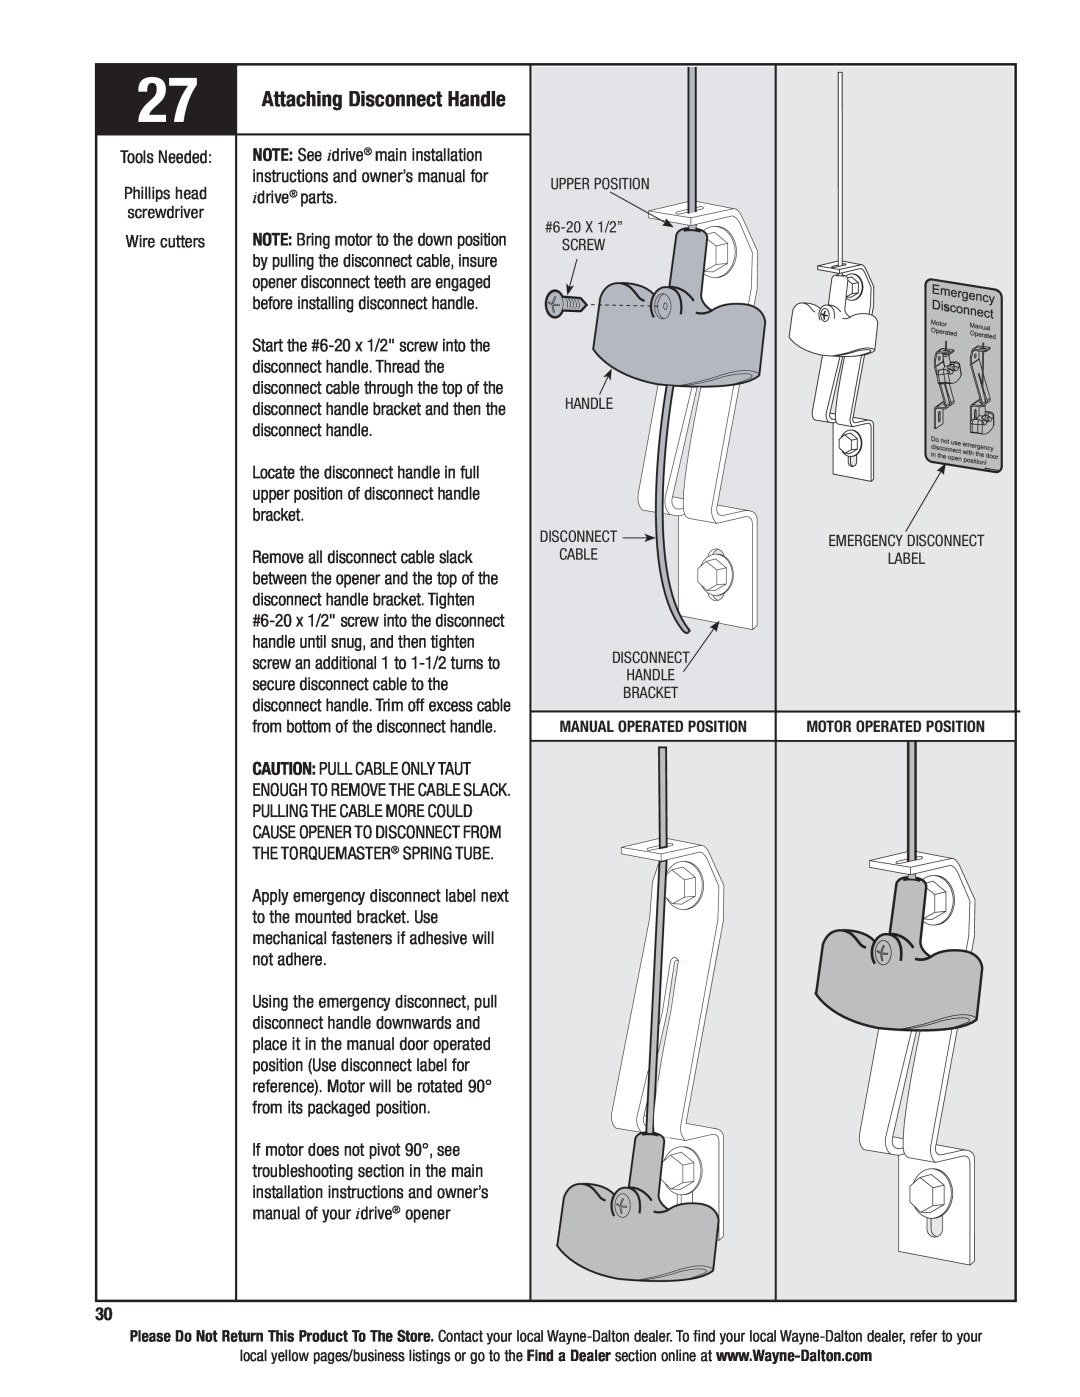 Wayne-Dalton 9400, AND 9600 installation instructions Attaching Disconnect Handle, screwdriver, Screw 